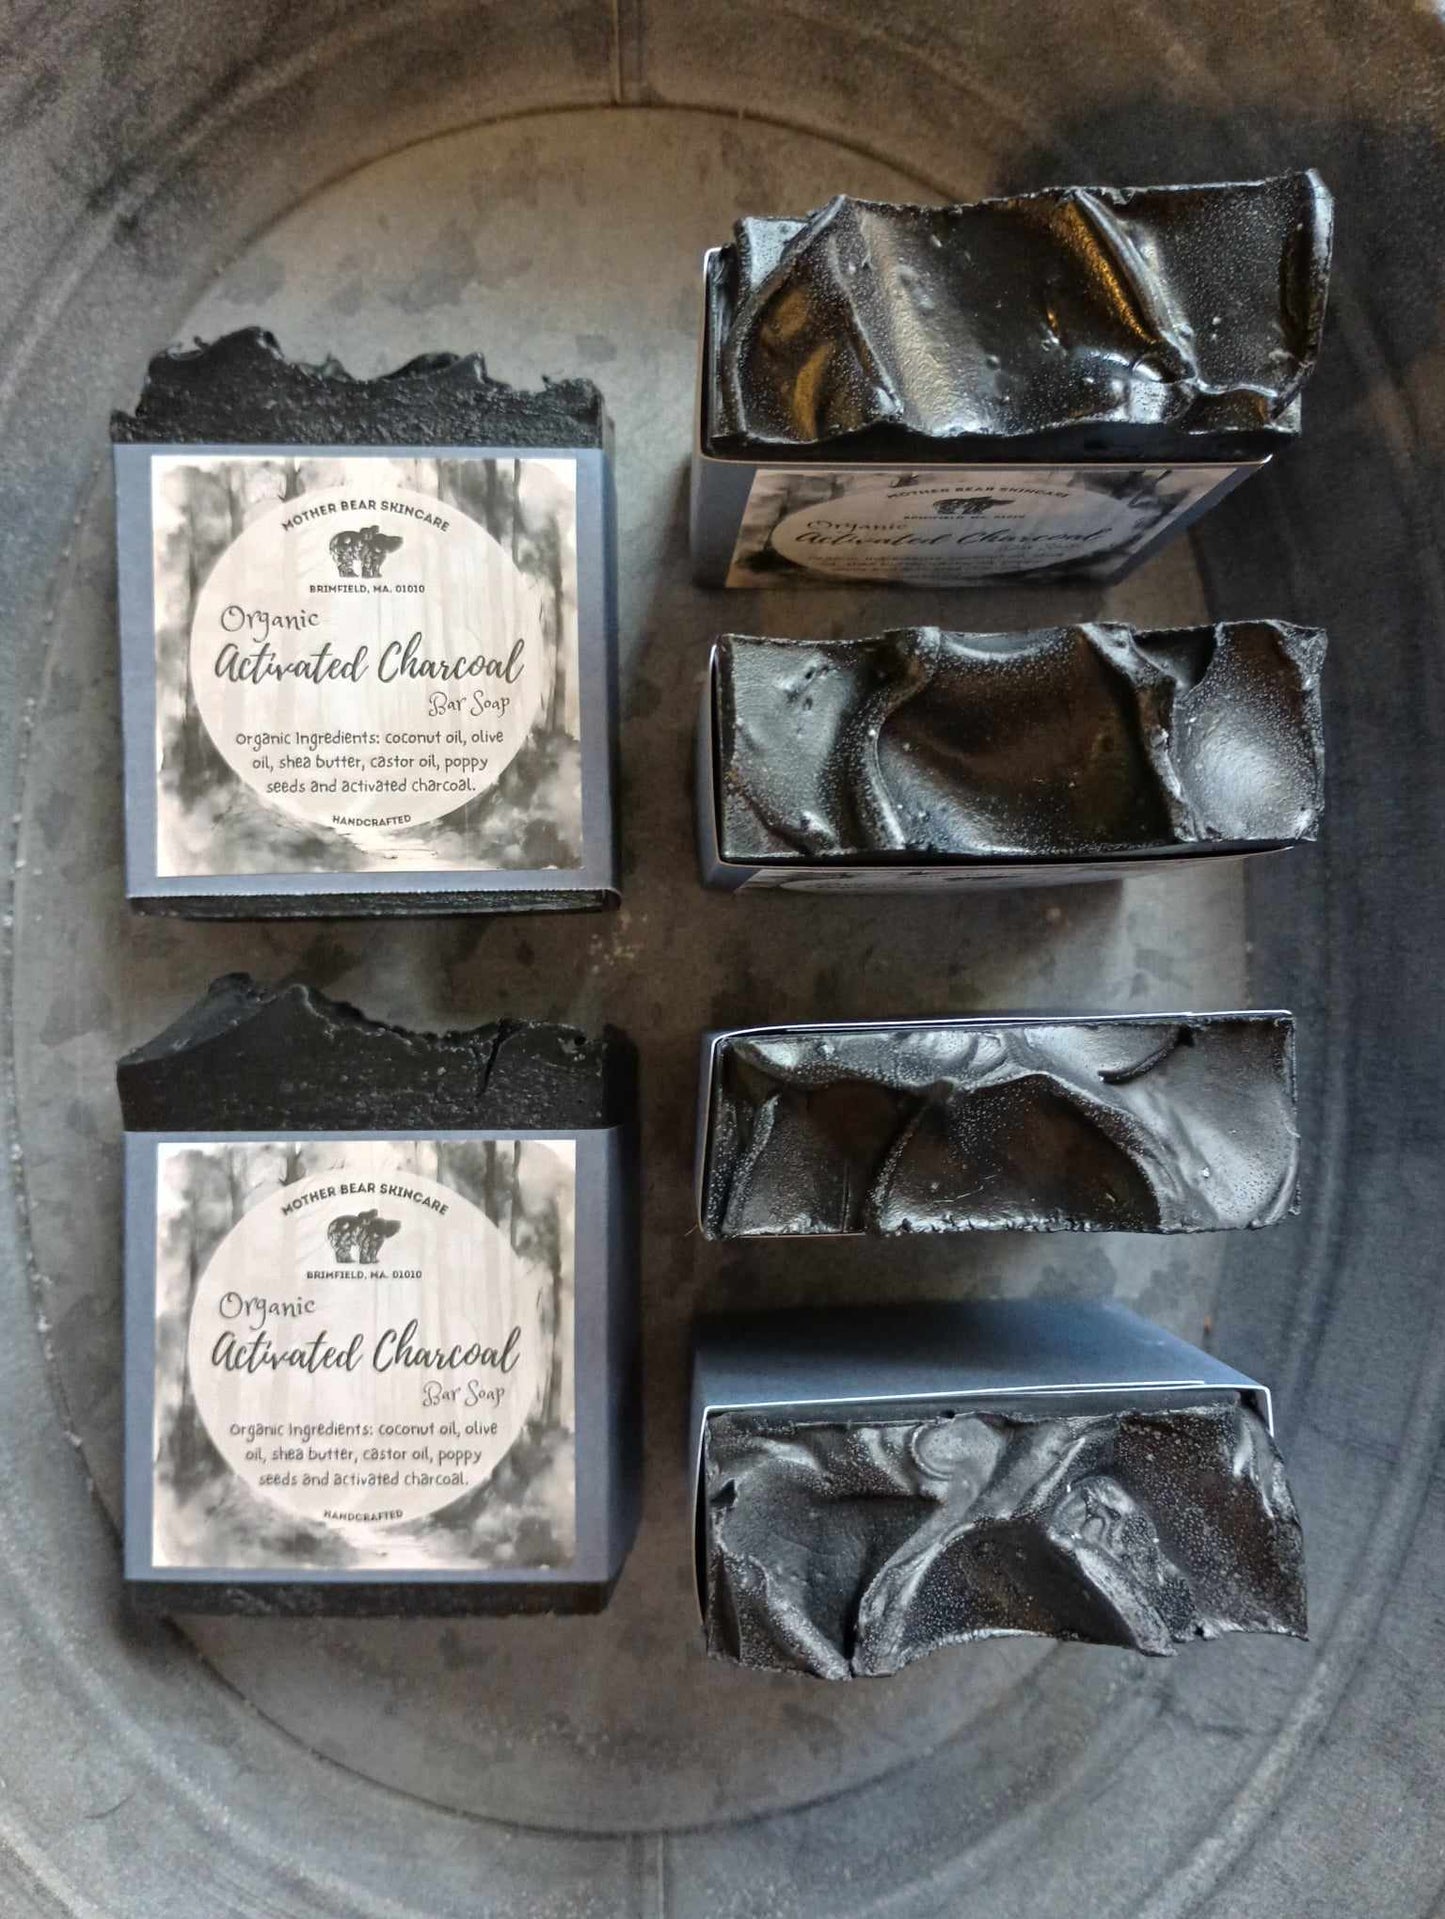 Organic Activated Charcoal Bar Soap